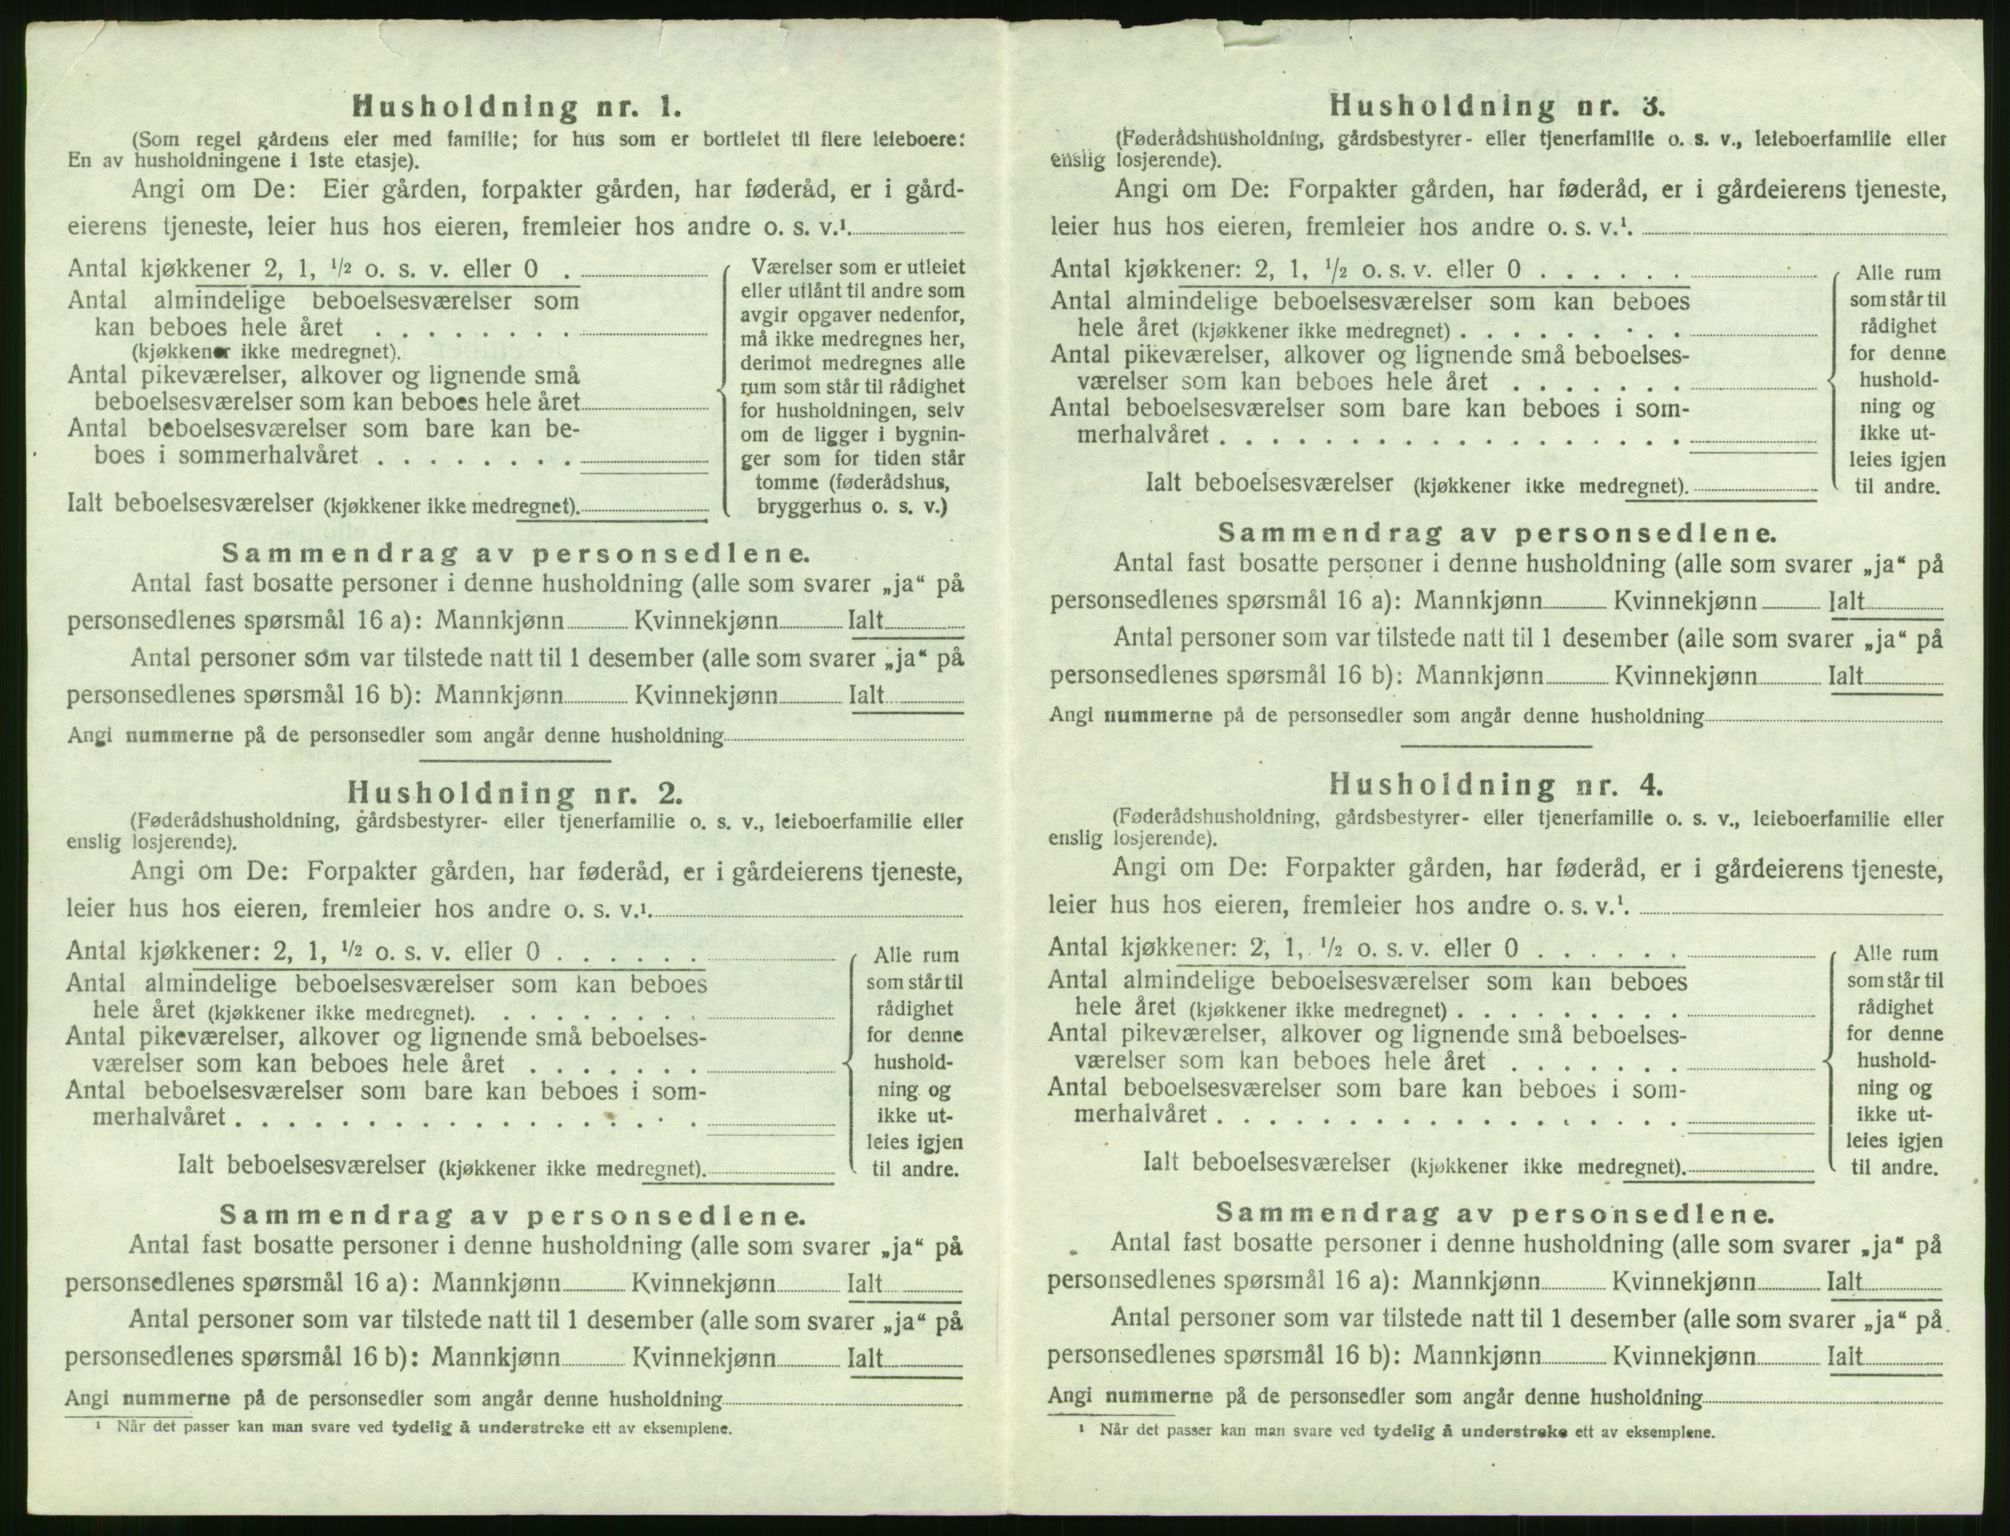 RA, 1920 census: Additional forms, 1920, p. 20